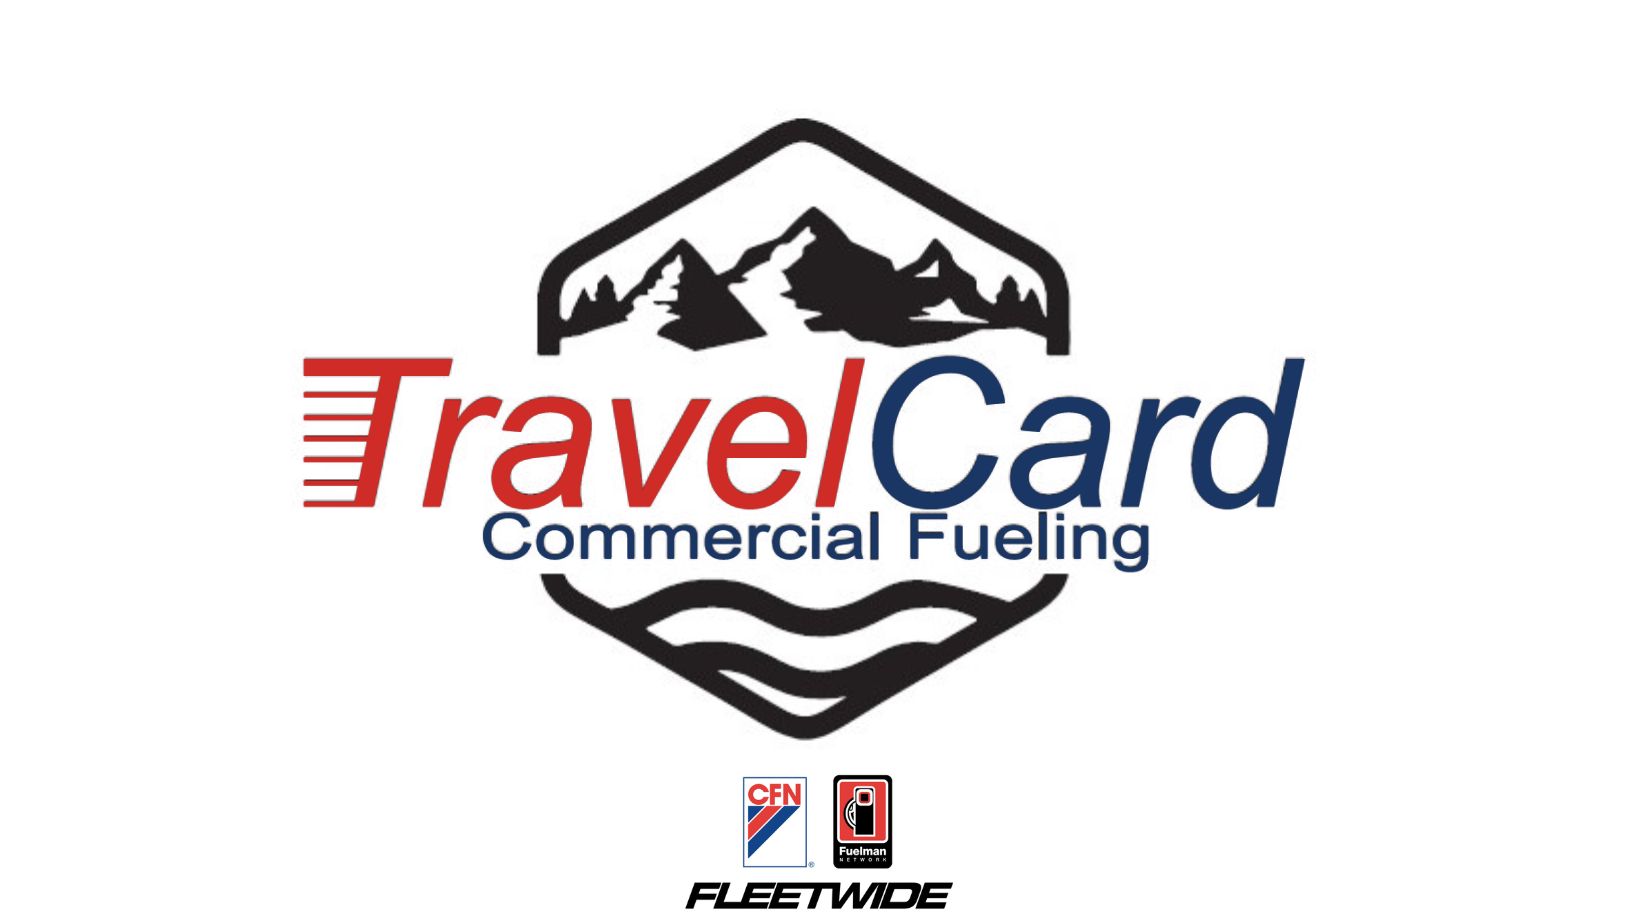 Travel Card Commercial Fueling